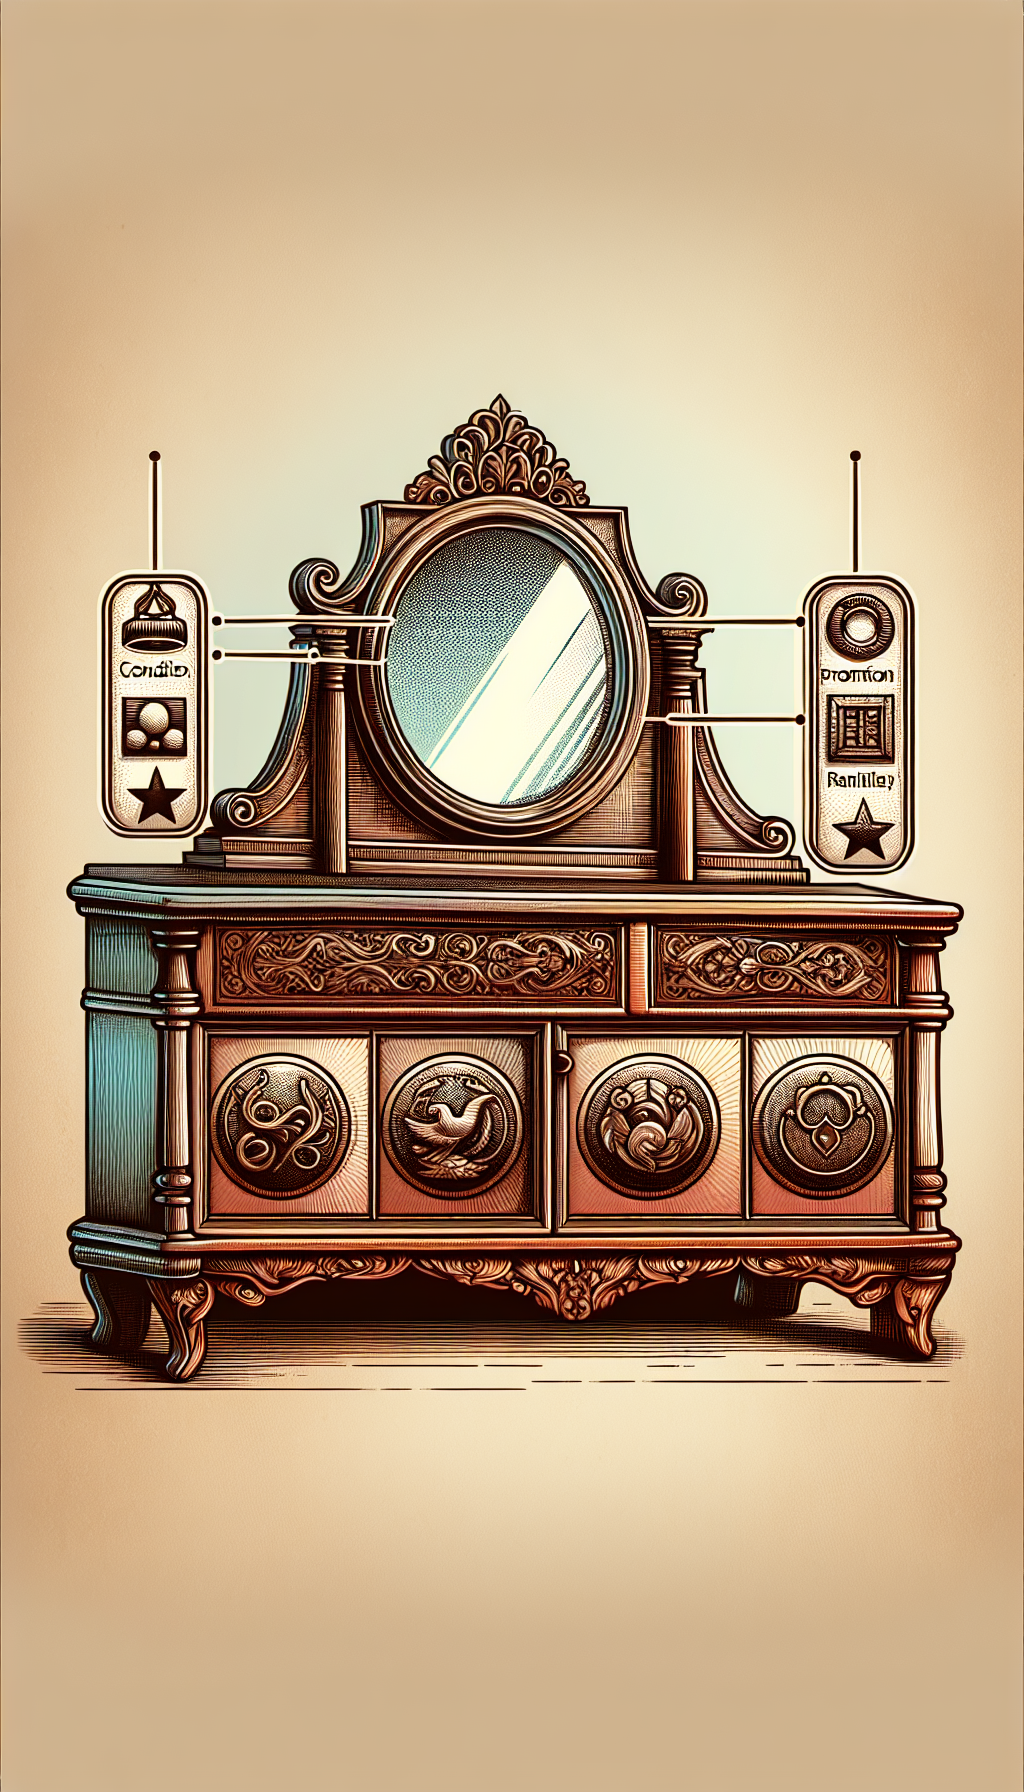 An eloquent illustration depicts an ornate antique sideboard with a mirror poised at its crest, reflecting symbols of key valuation factors—condition, provenance scrolls, era-specific design elements, and rarity stars. The sideboard stands on a gradient background transitioning from vintage sepia to modern vibrancy, illustrating the timeless value journey within the history-imbued wood grain textures and craftsmanship details.